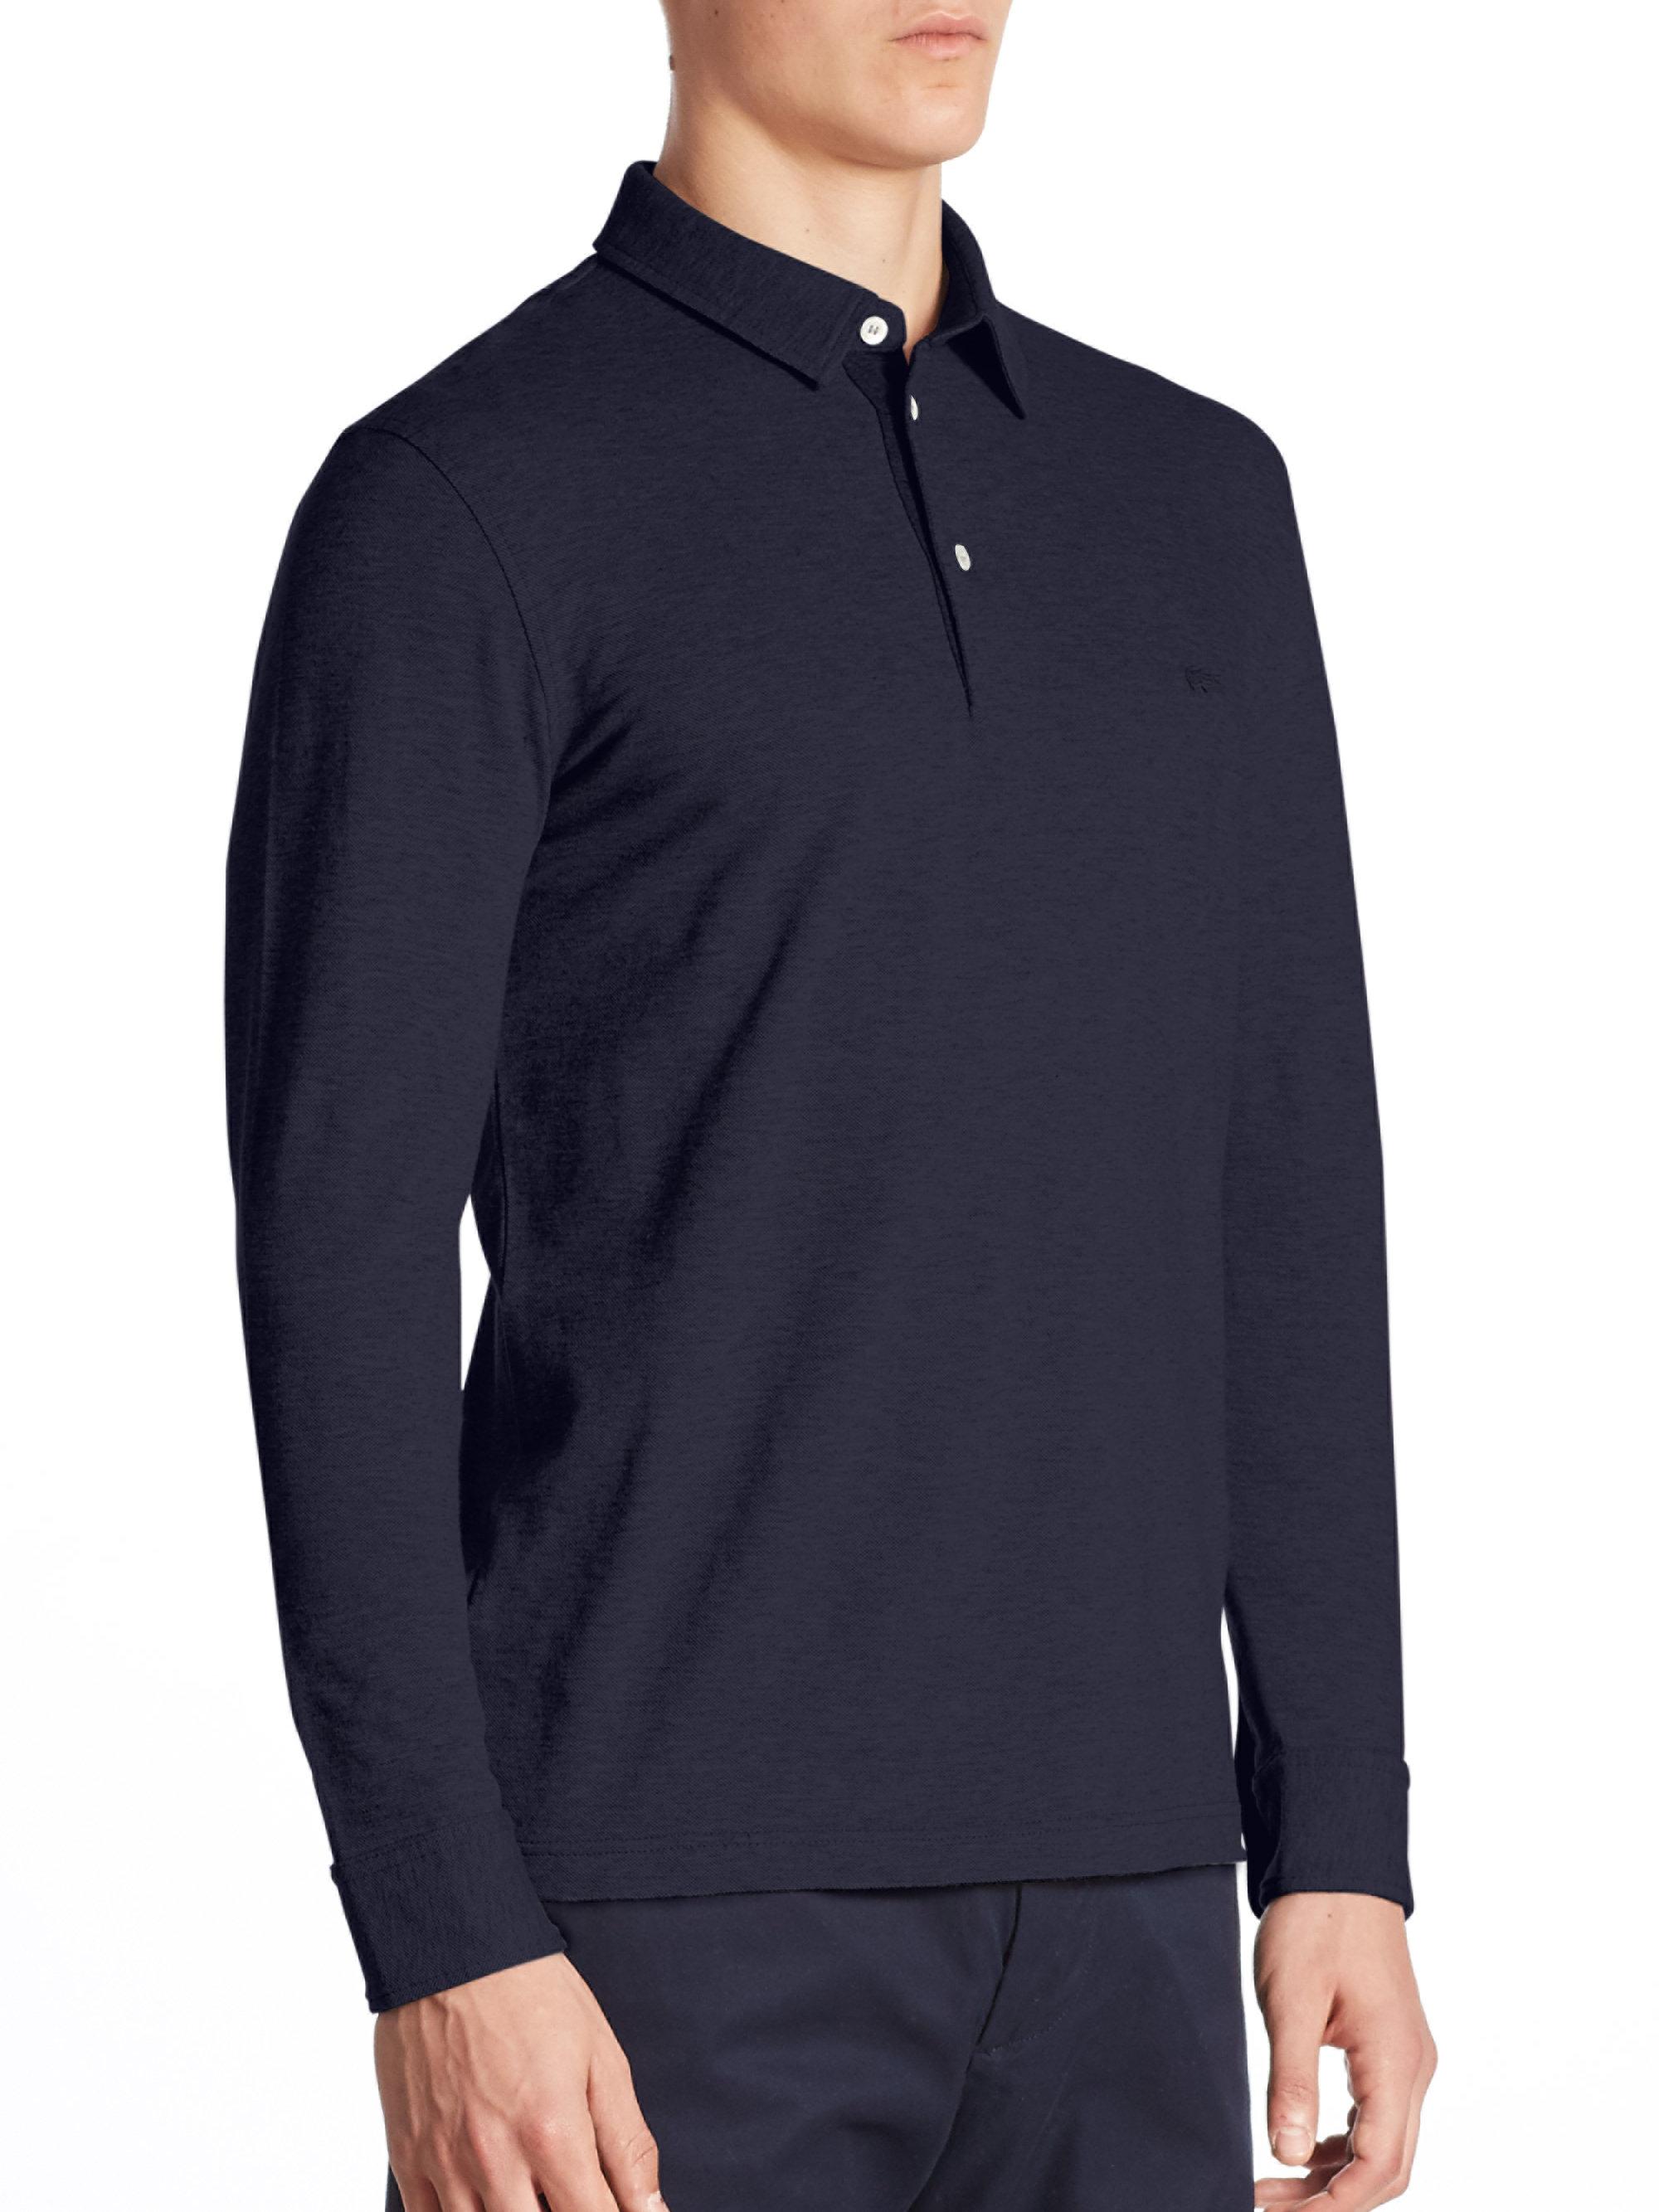 Lacoste Wool-blend Long Sleeve Polo Shirt in Grey (Gray) for Men - Lyst